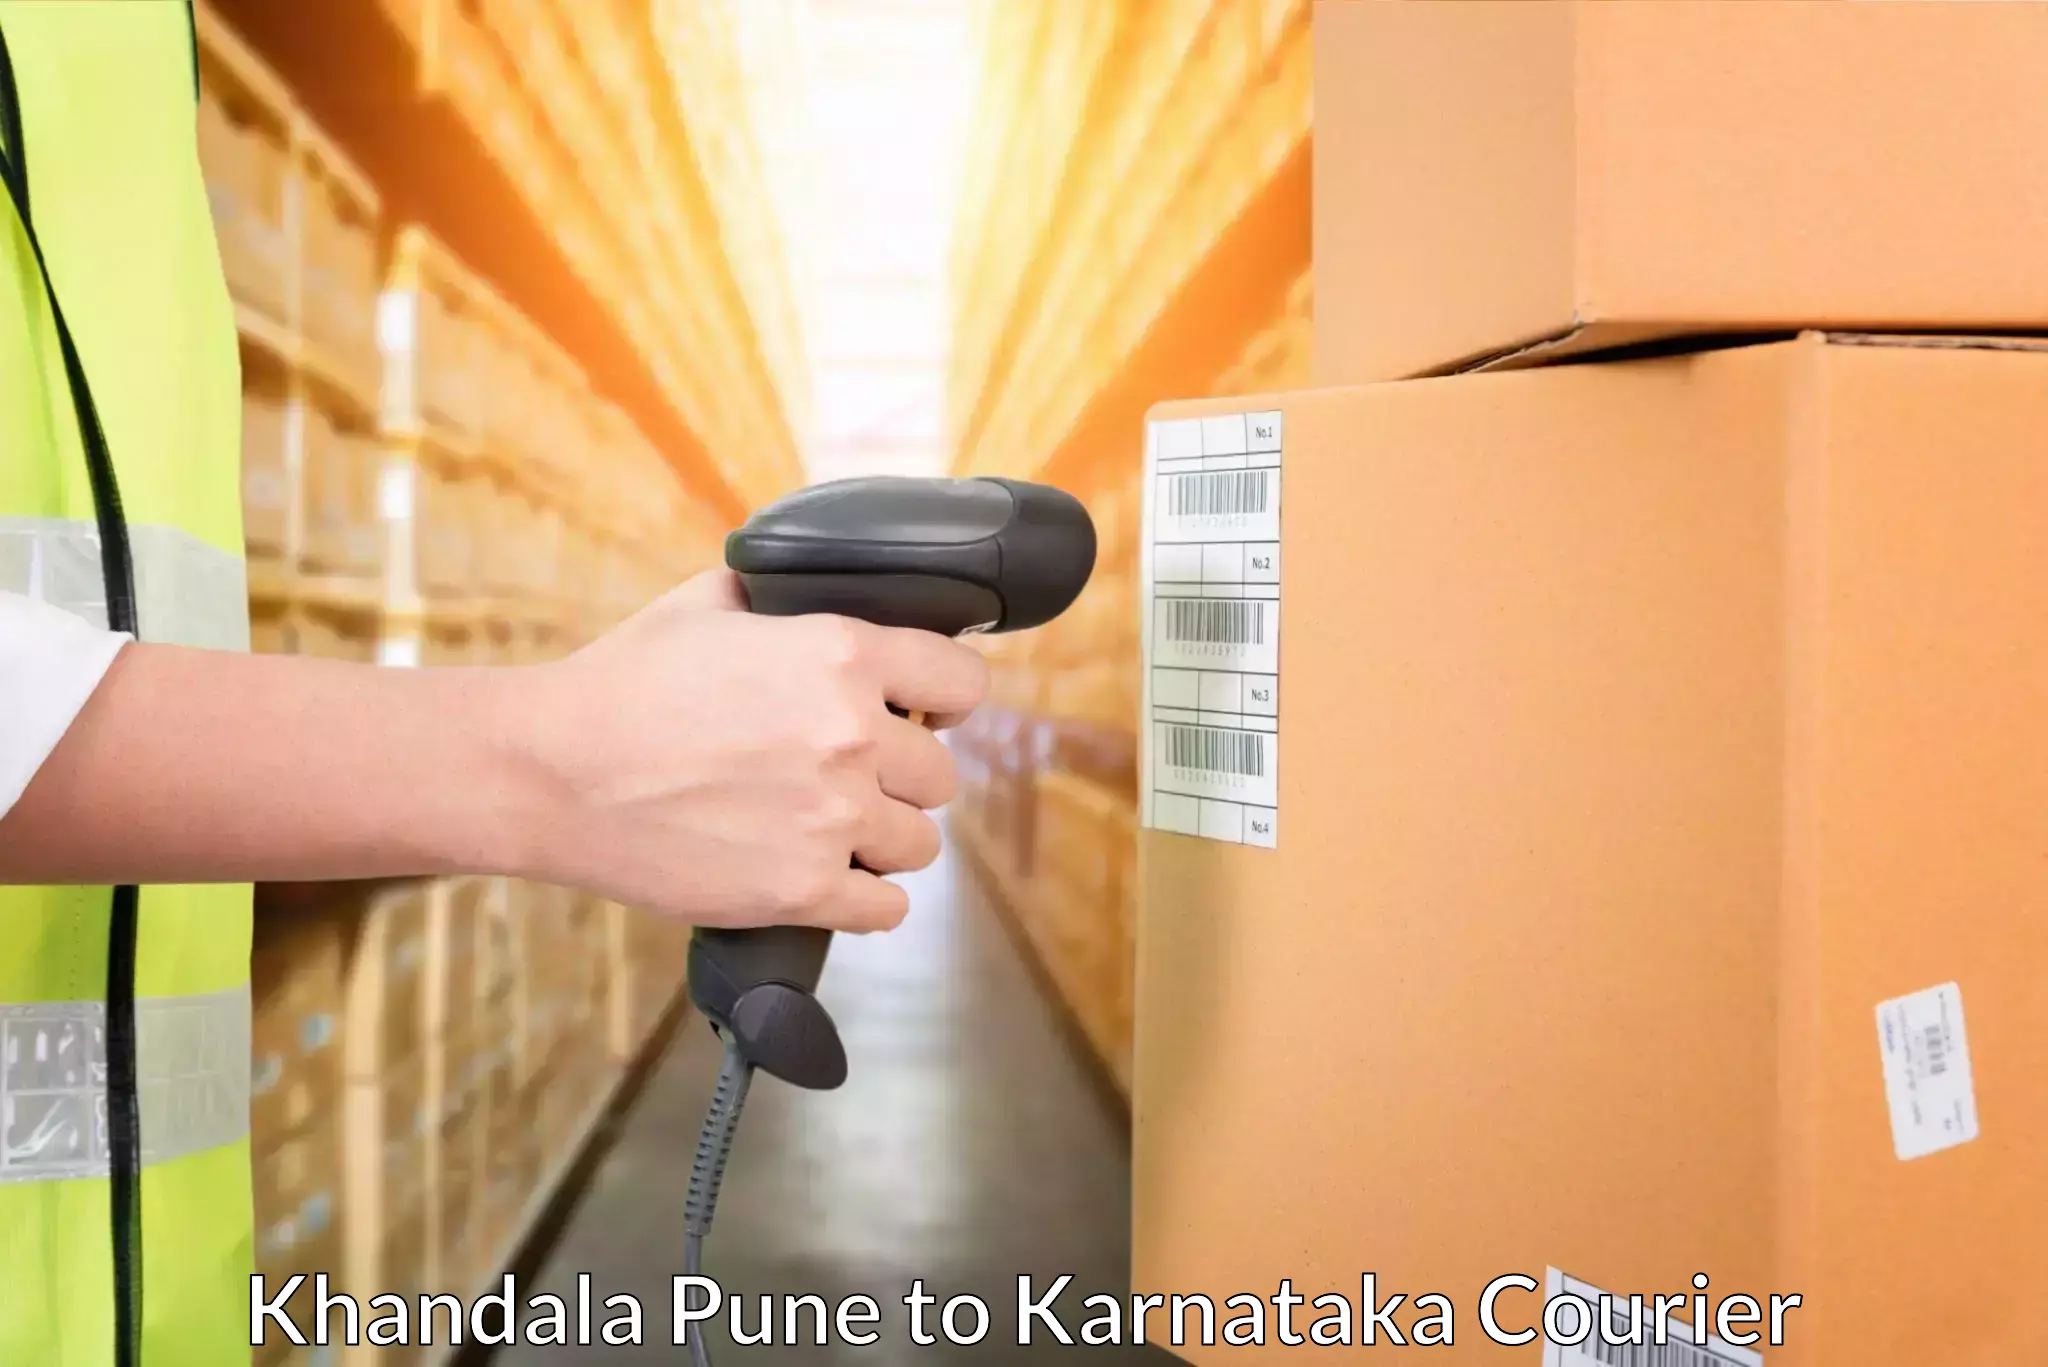 24-hour delivery options in Khandala Pune to Bangalore